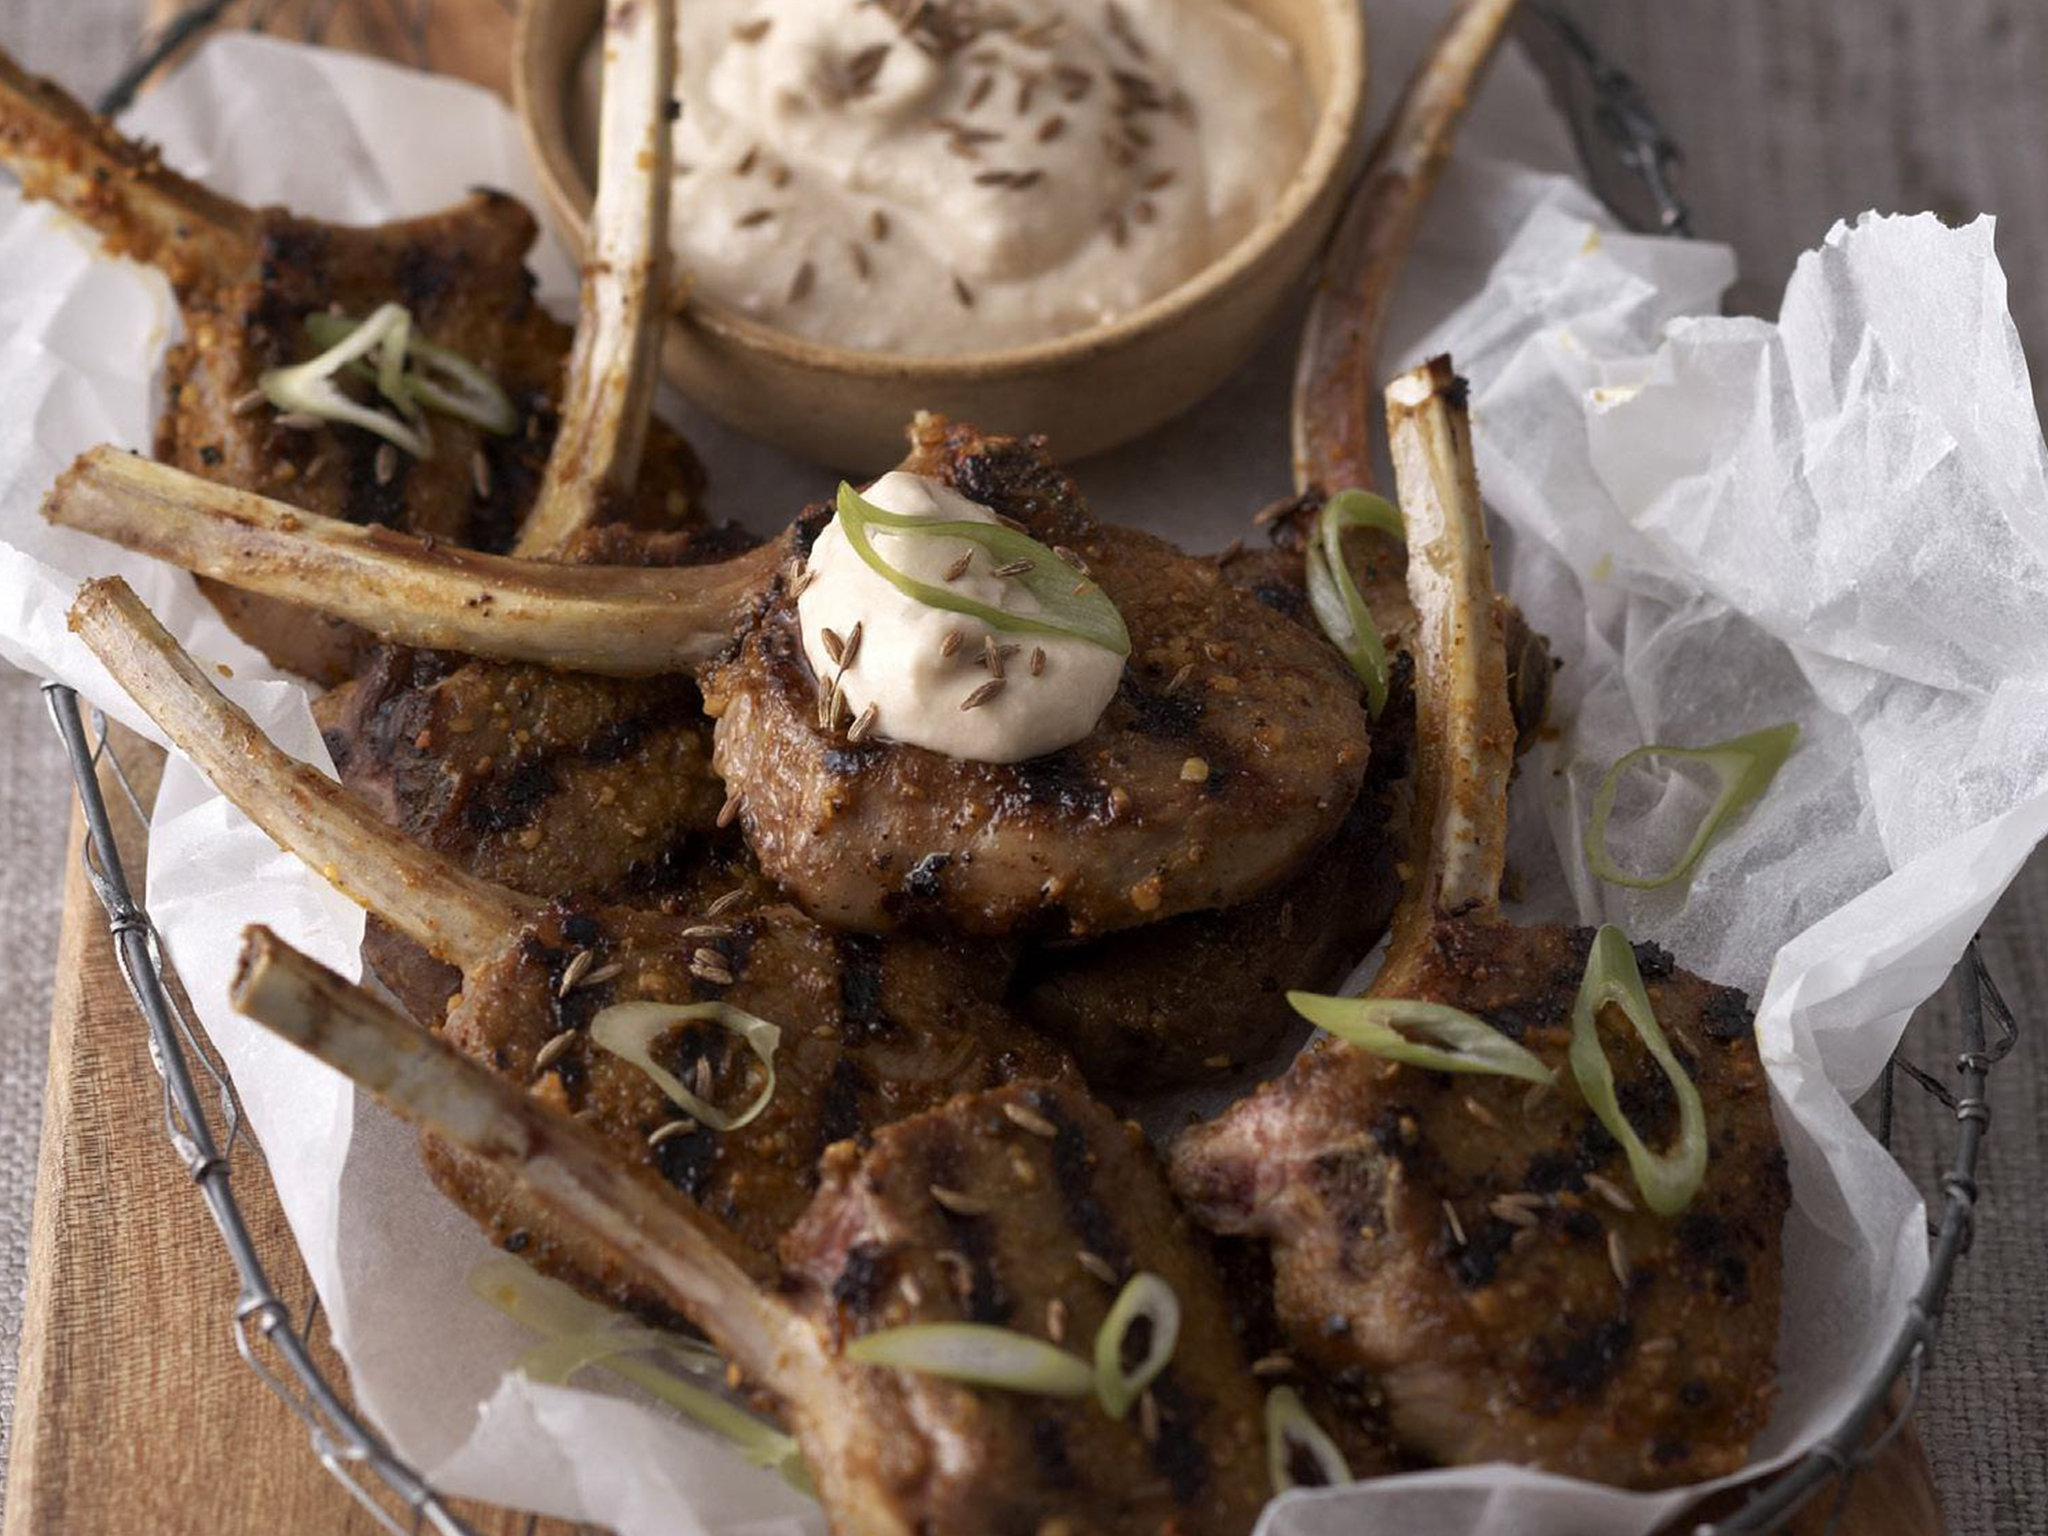 Moroccan-style lamb cutlets